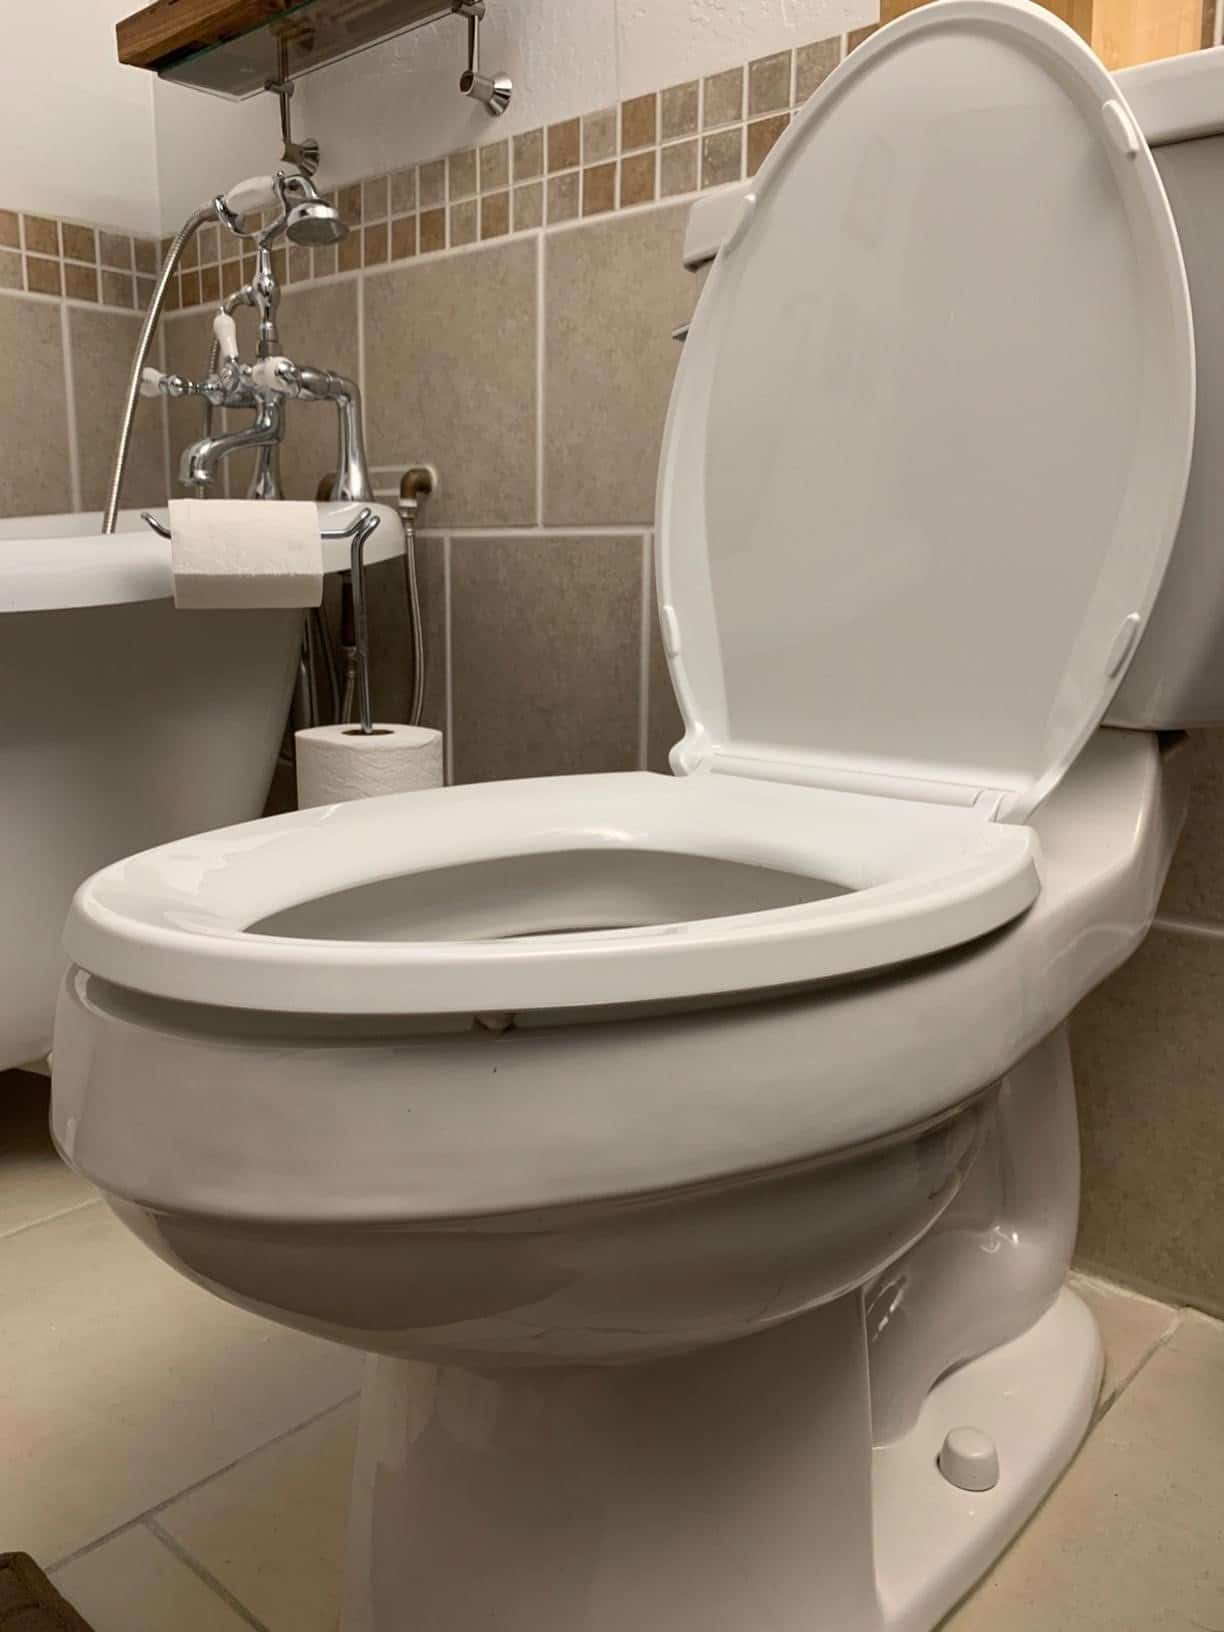 How to Remove a Soft Close Toilet Seat - Toilet Haven